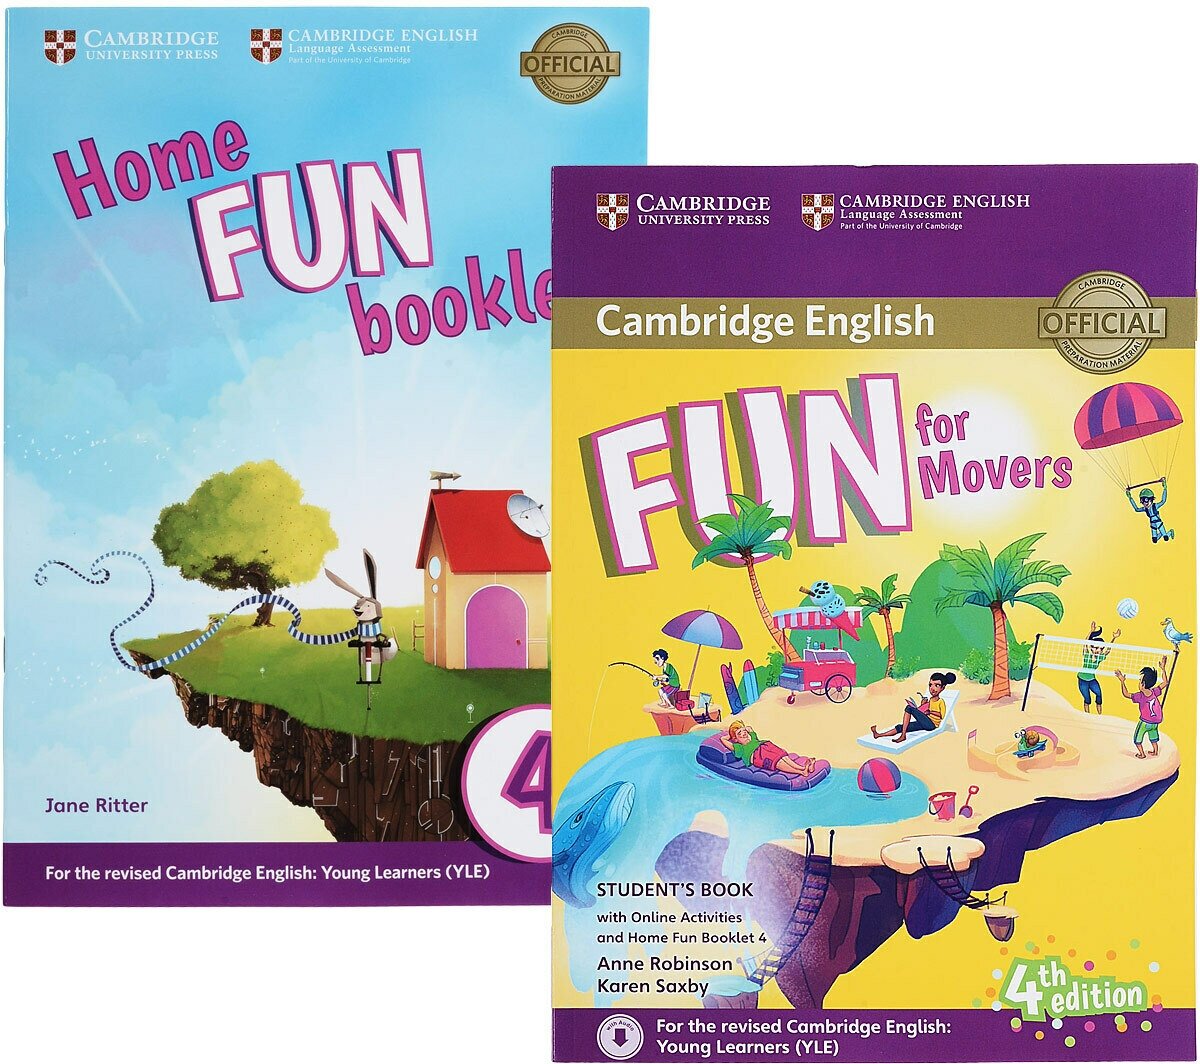 English Fun for Movers 4th Edition Student's Book and Home Fun Booklet 4 +CD